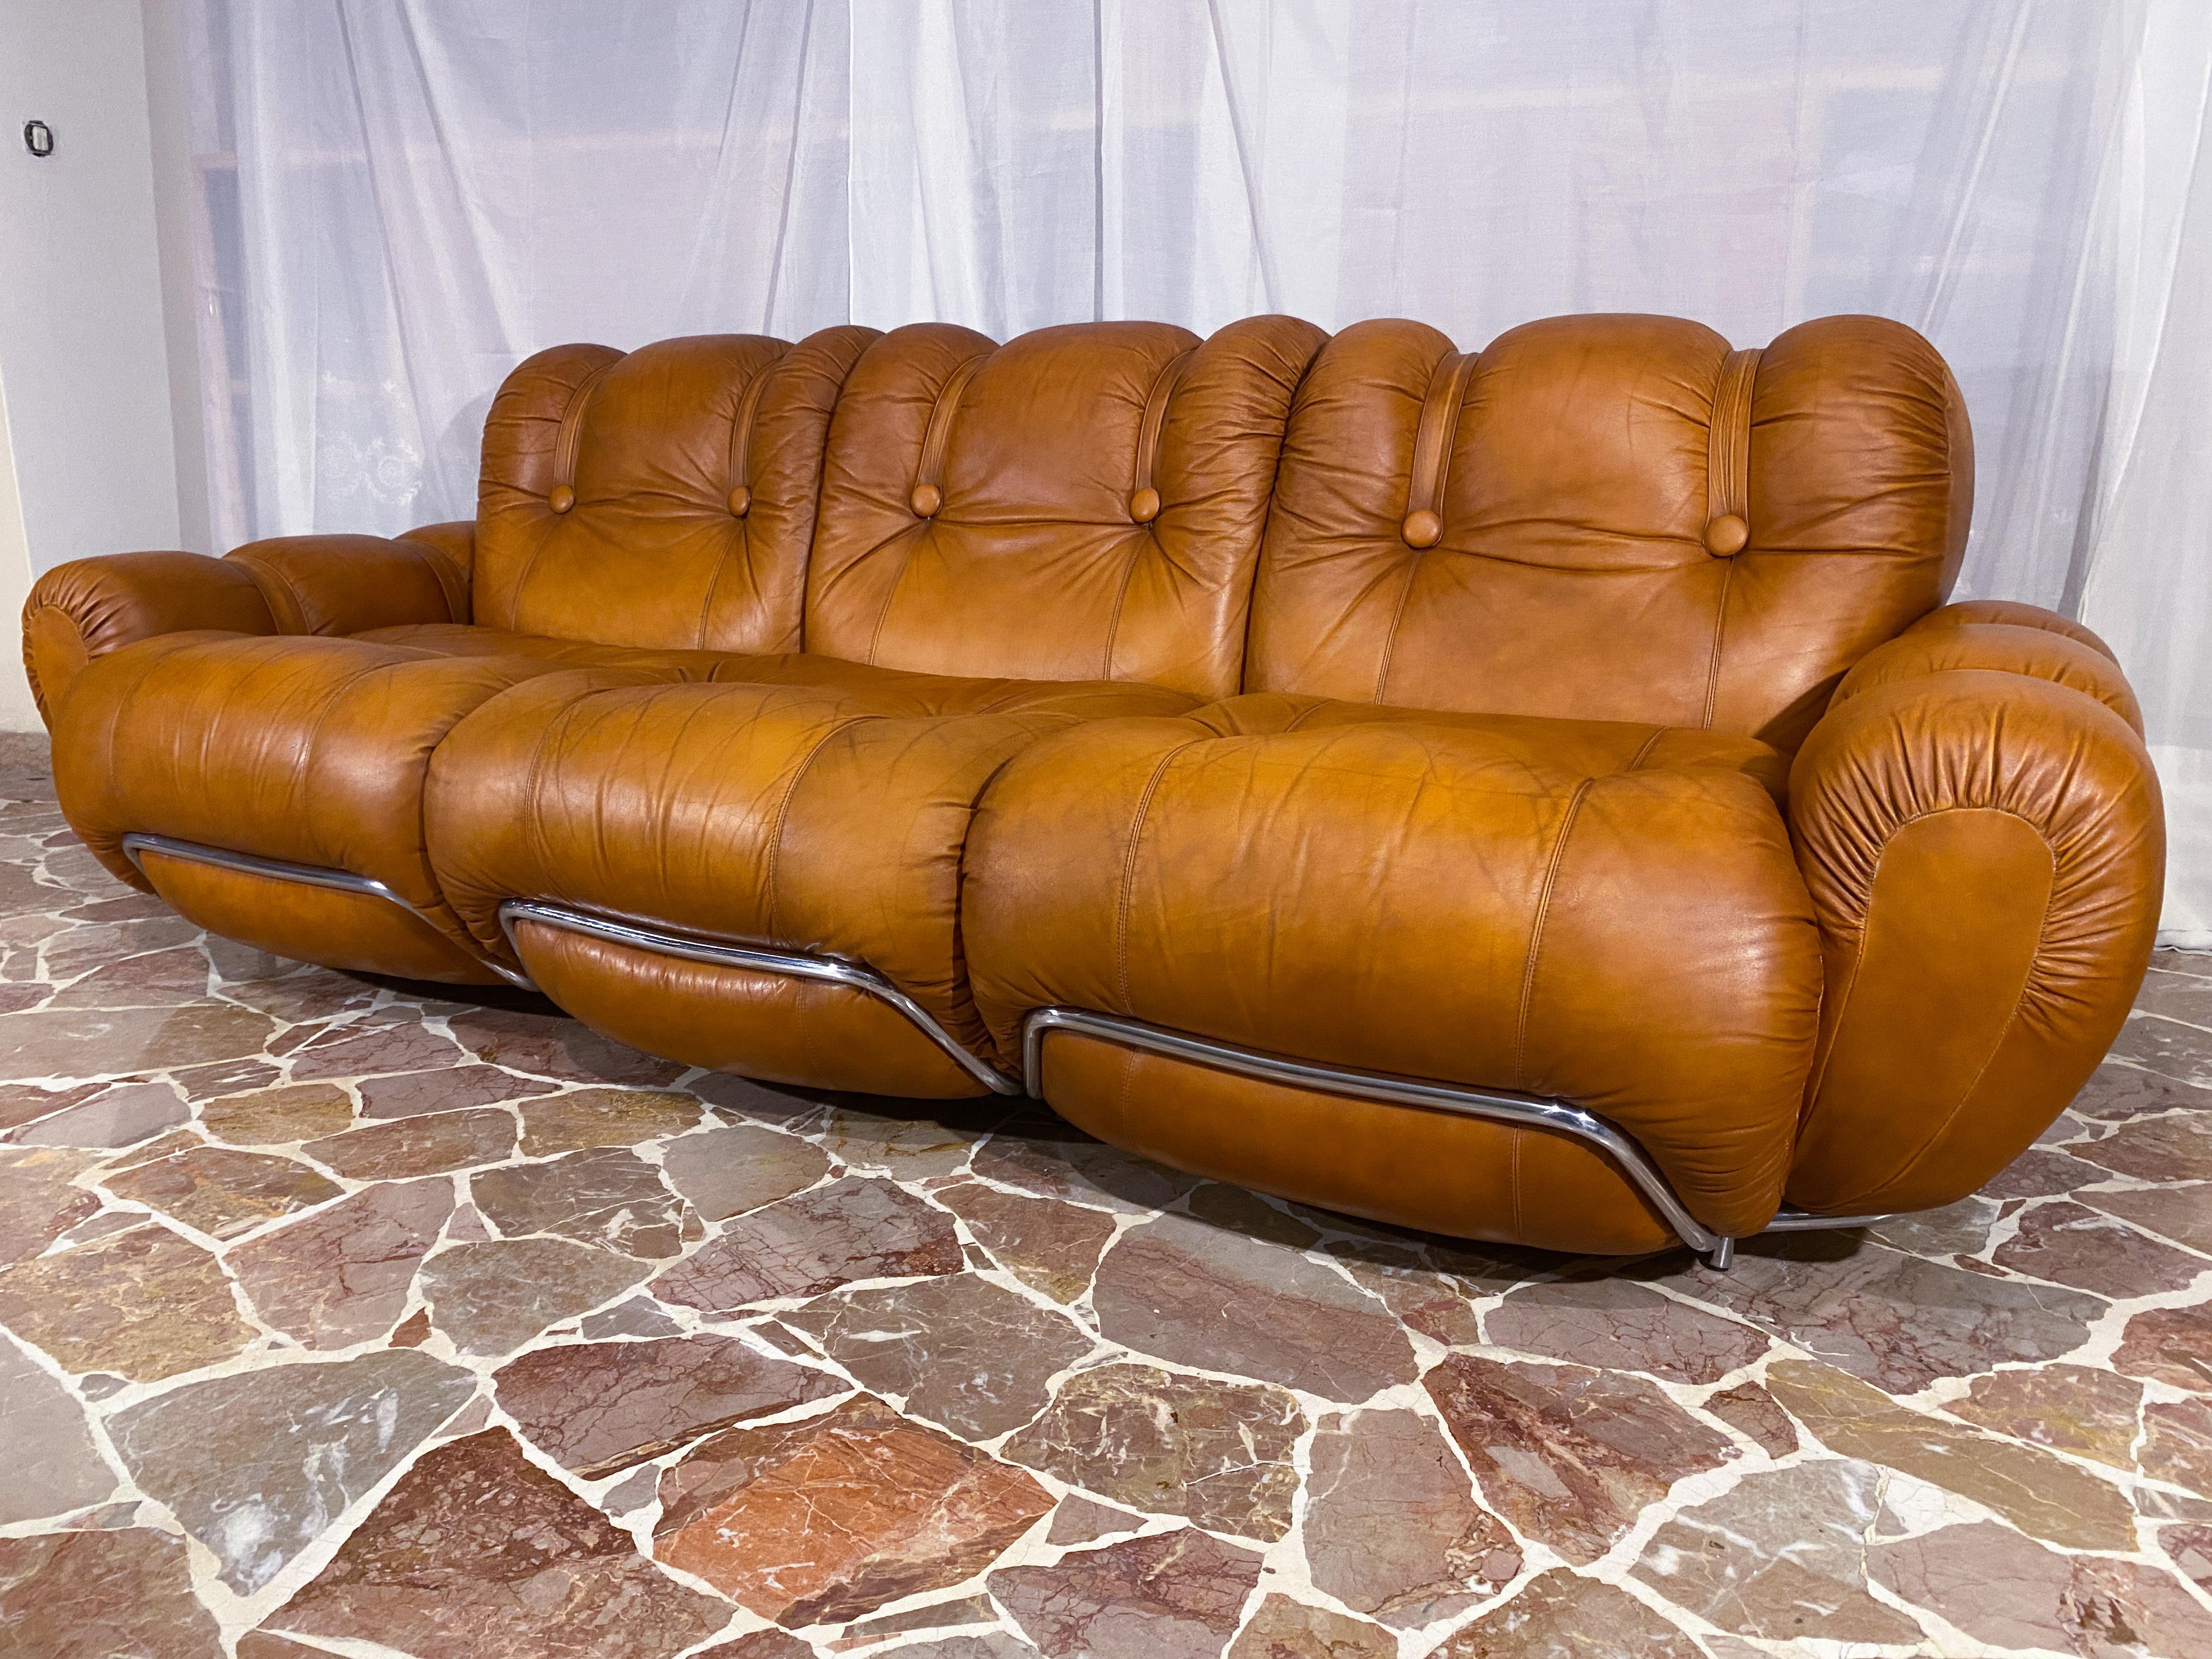 Italian Mid-Century Space Age Living Room Set in Natural Leather, 1970 For Sale 10